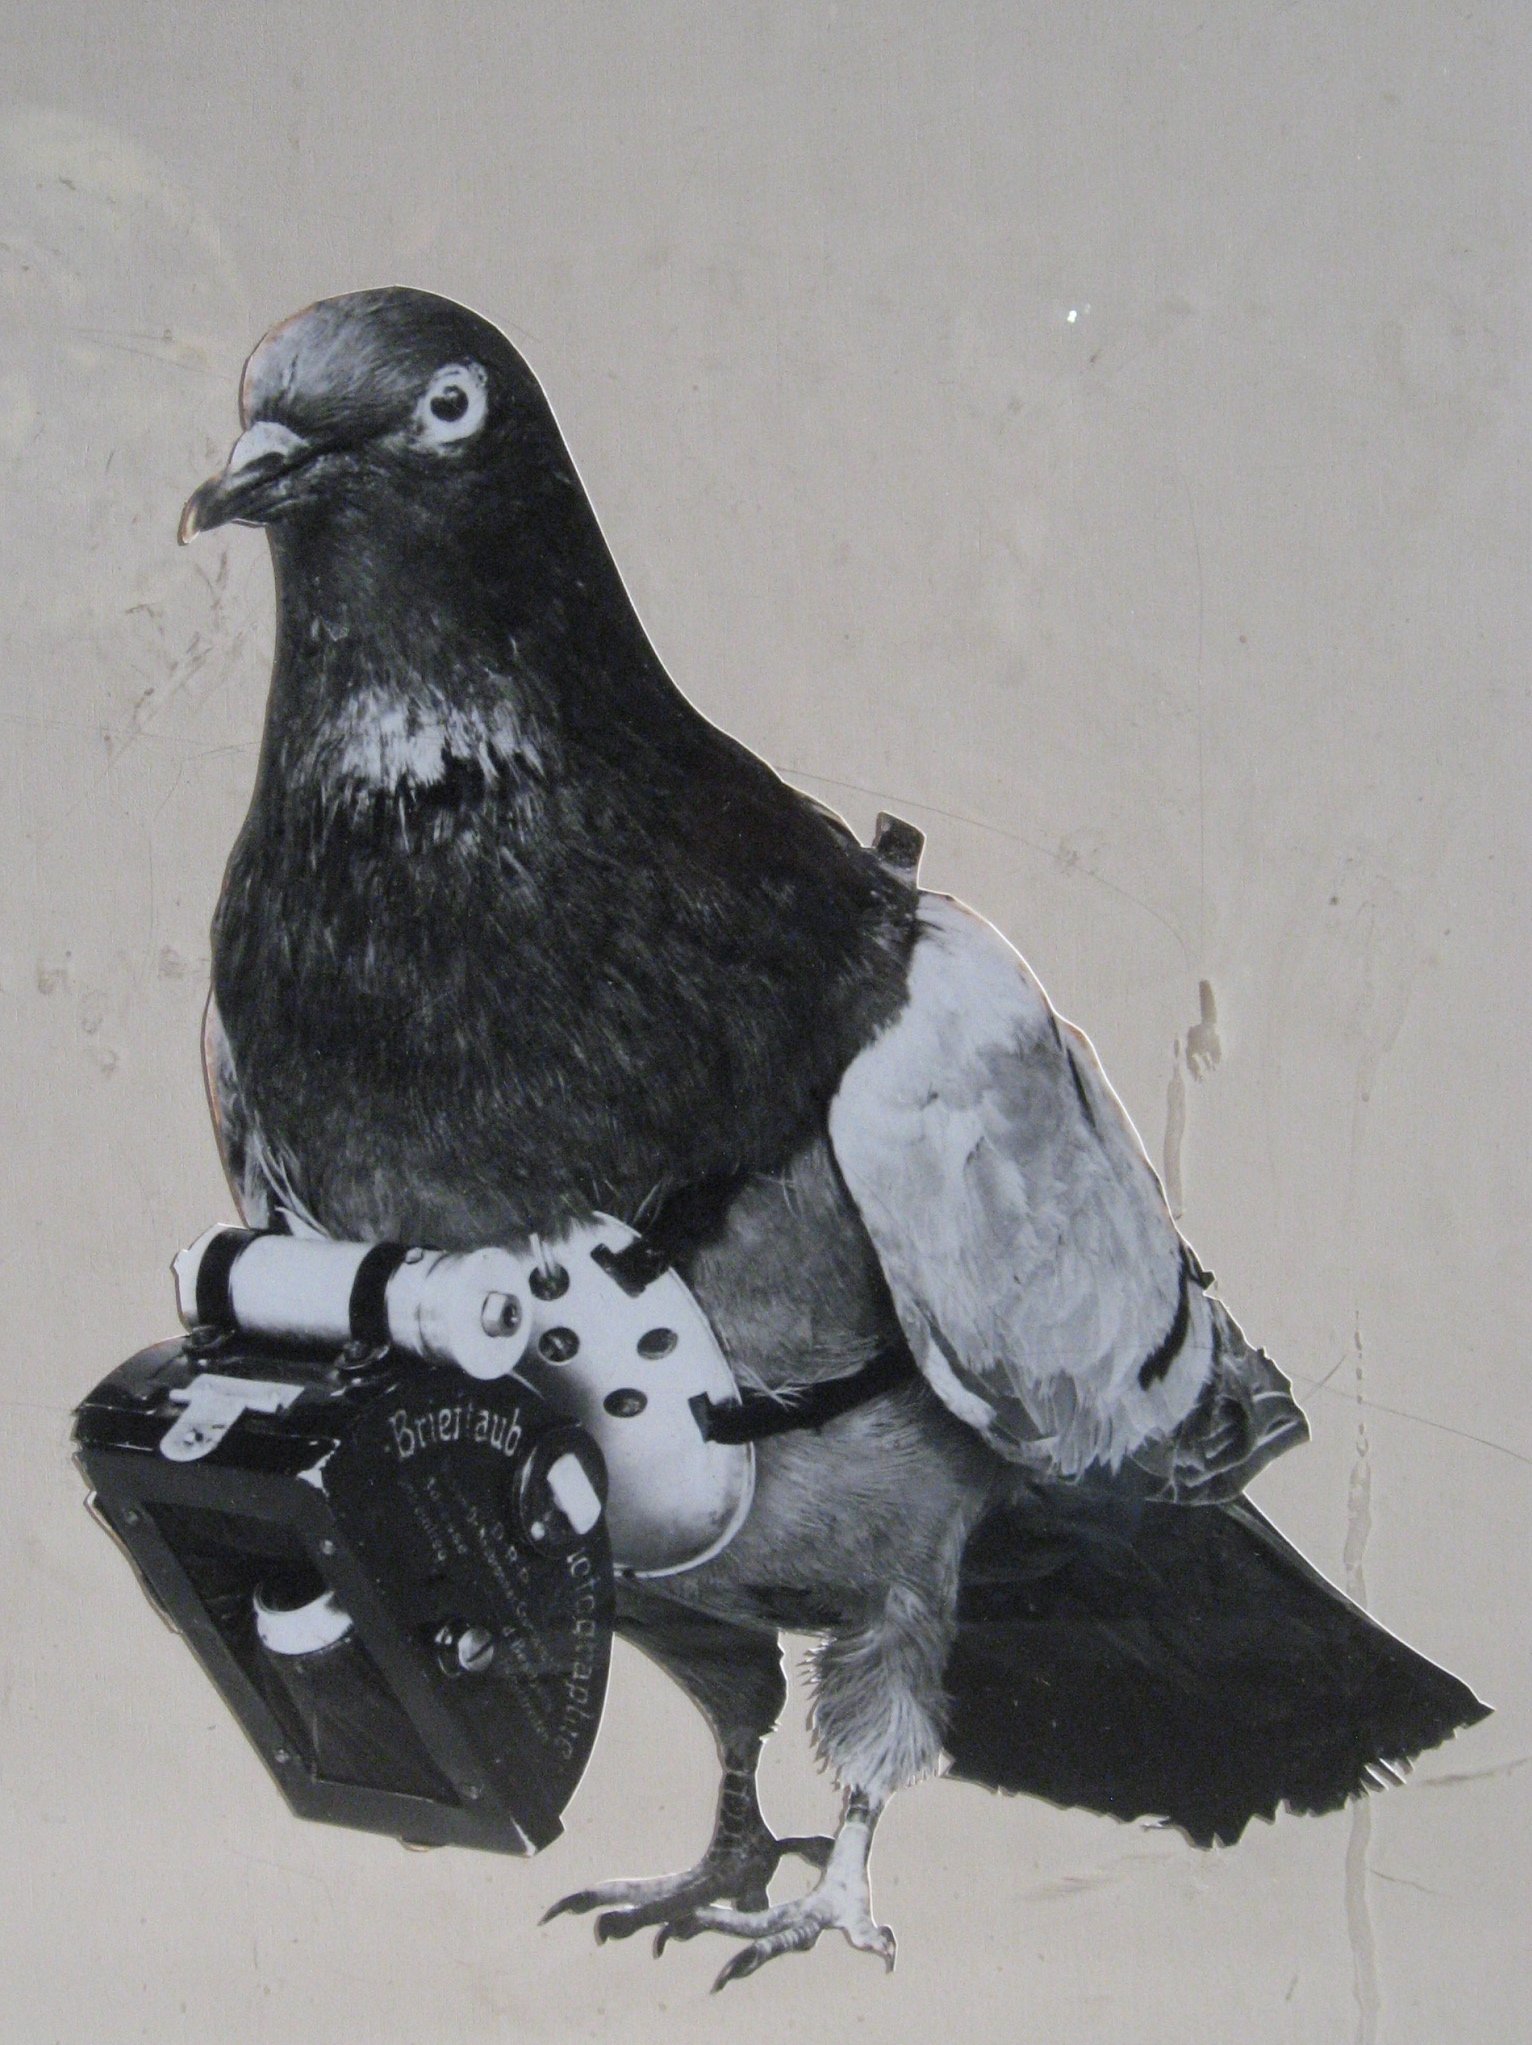 In the 1970s, The C.I.A.'s Bird Camera Program Spied on the Soviets